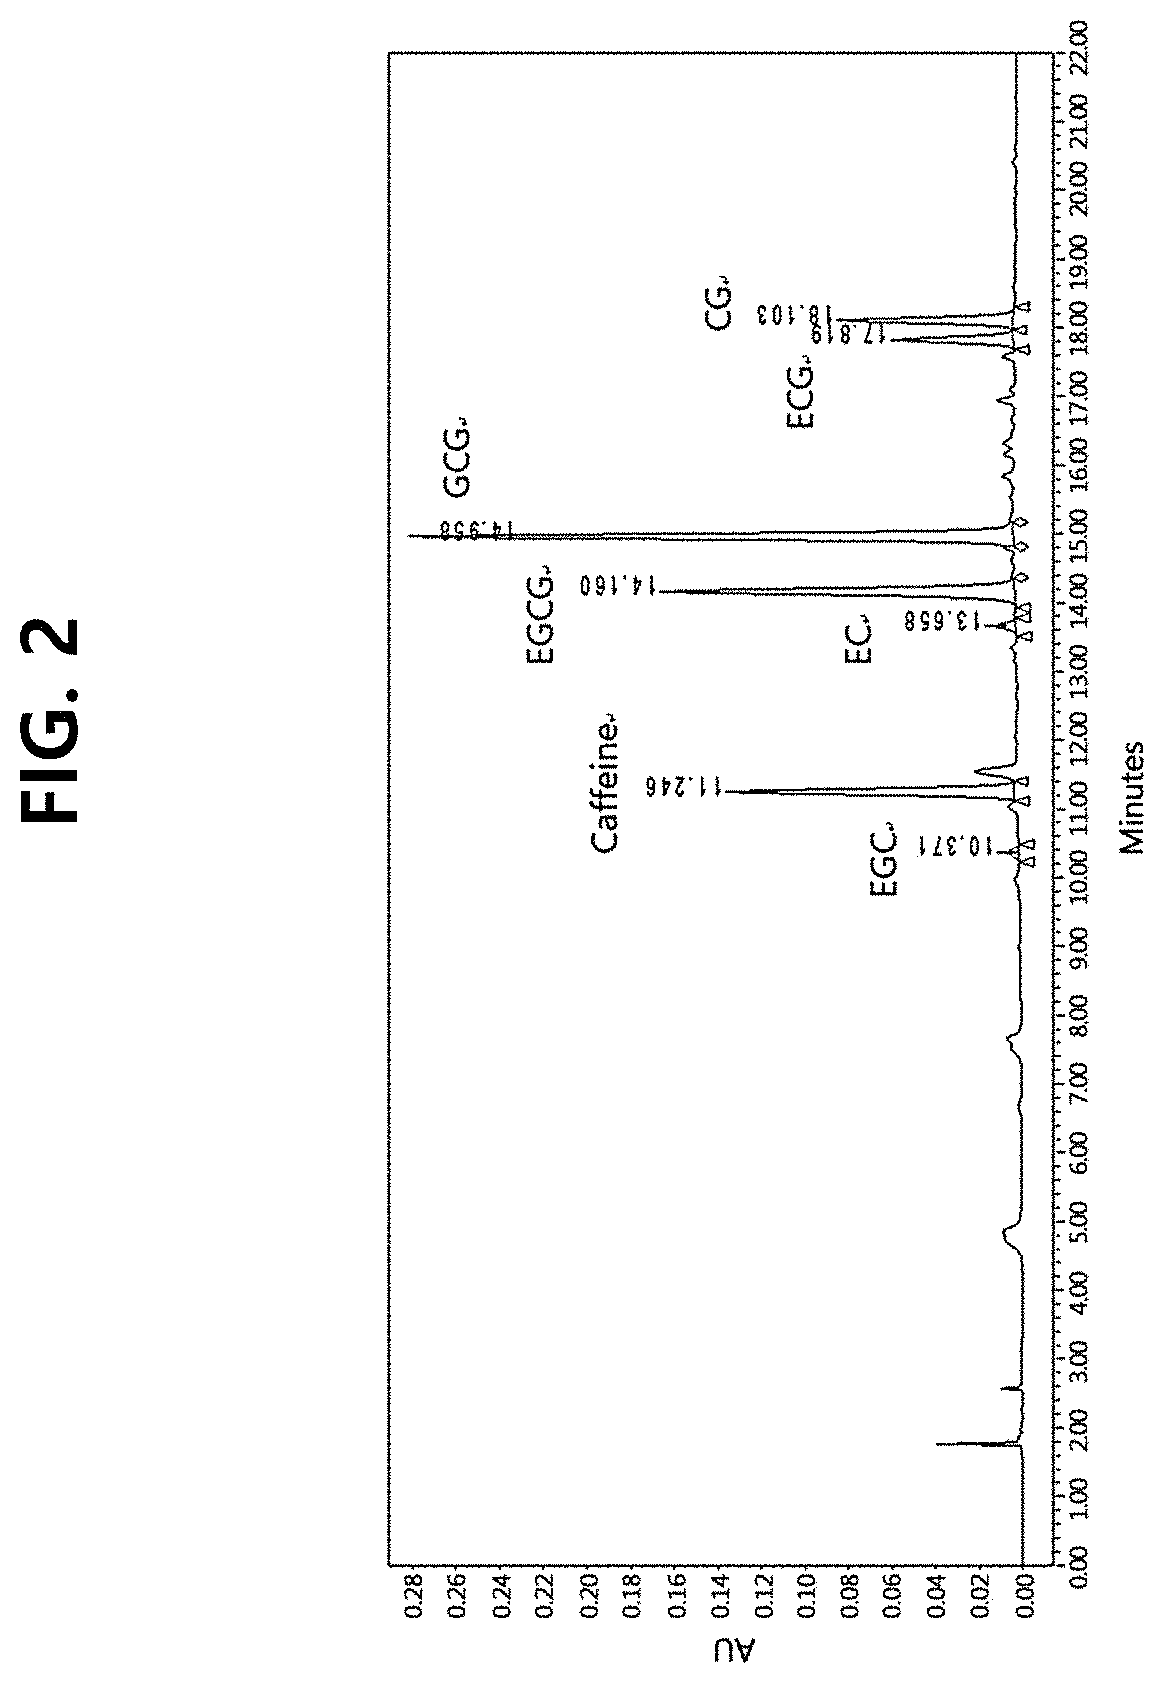 Composition for enhancing cognitive function comprising green tea extract which has modified amounts of ingredients